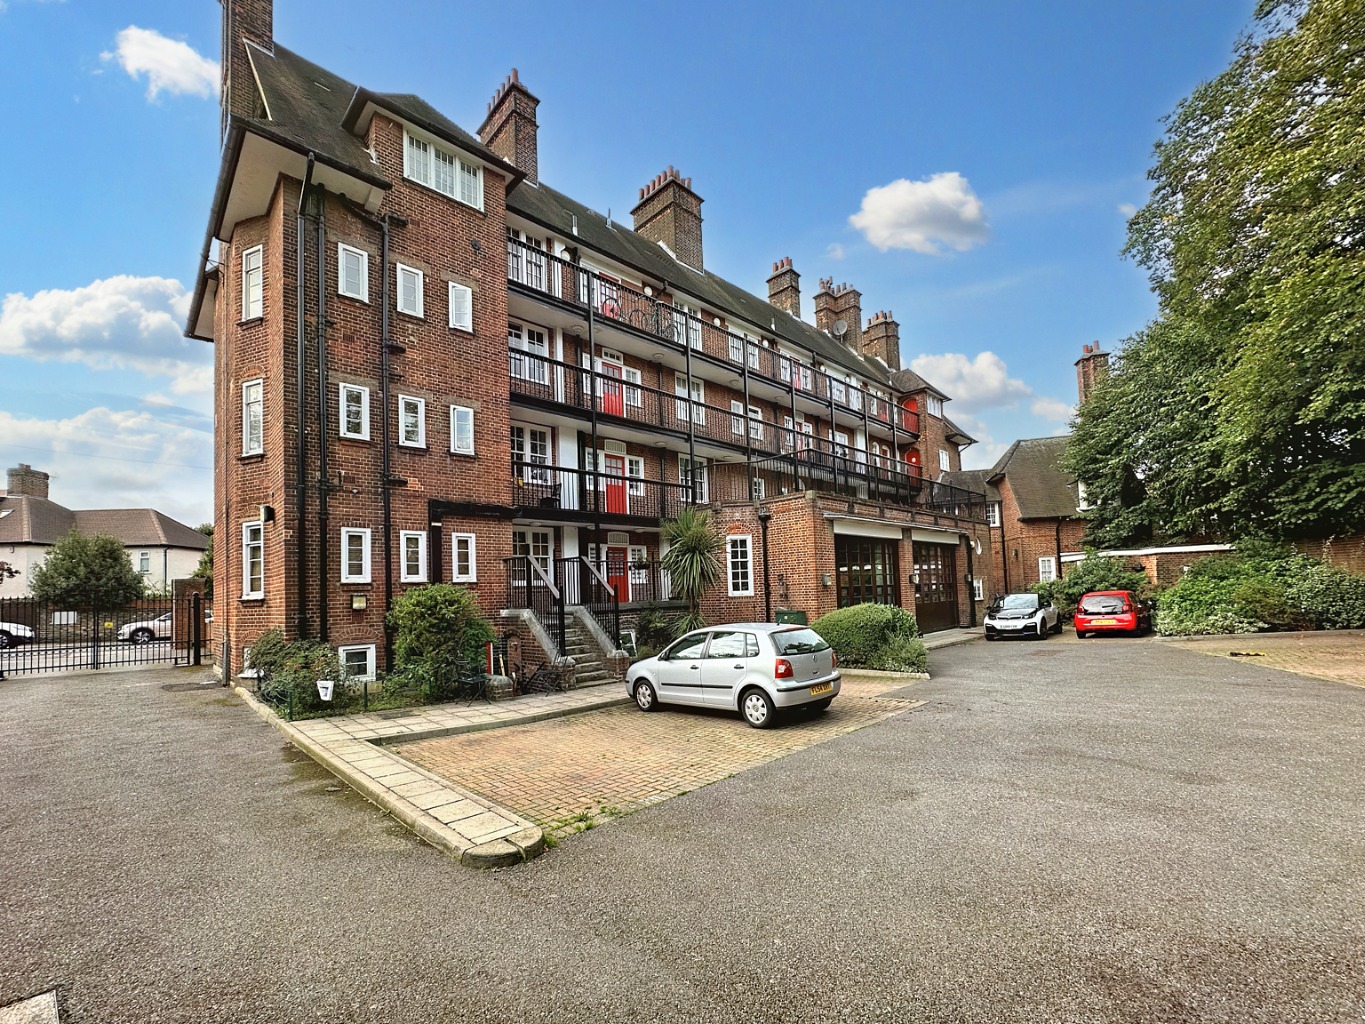 2 bed flat for sale in Eaglesfield Road, London - Property Image 1